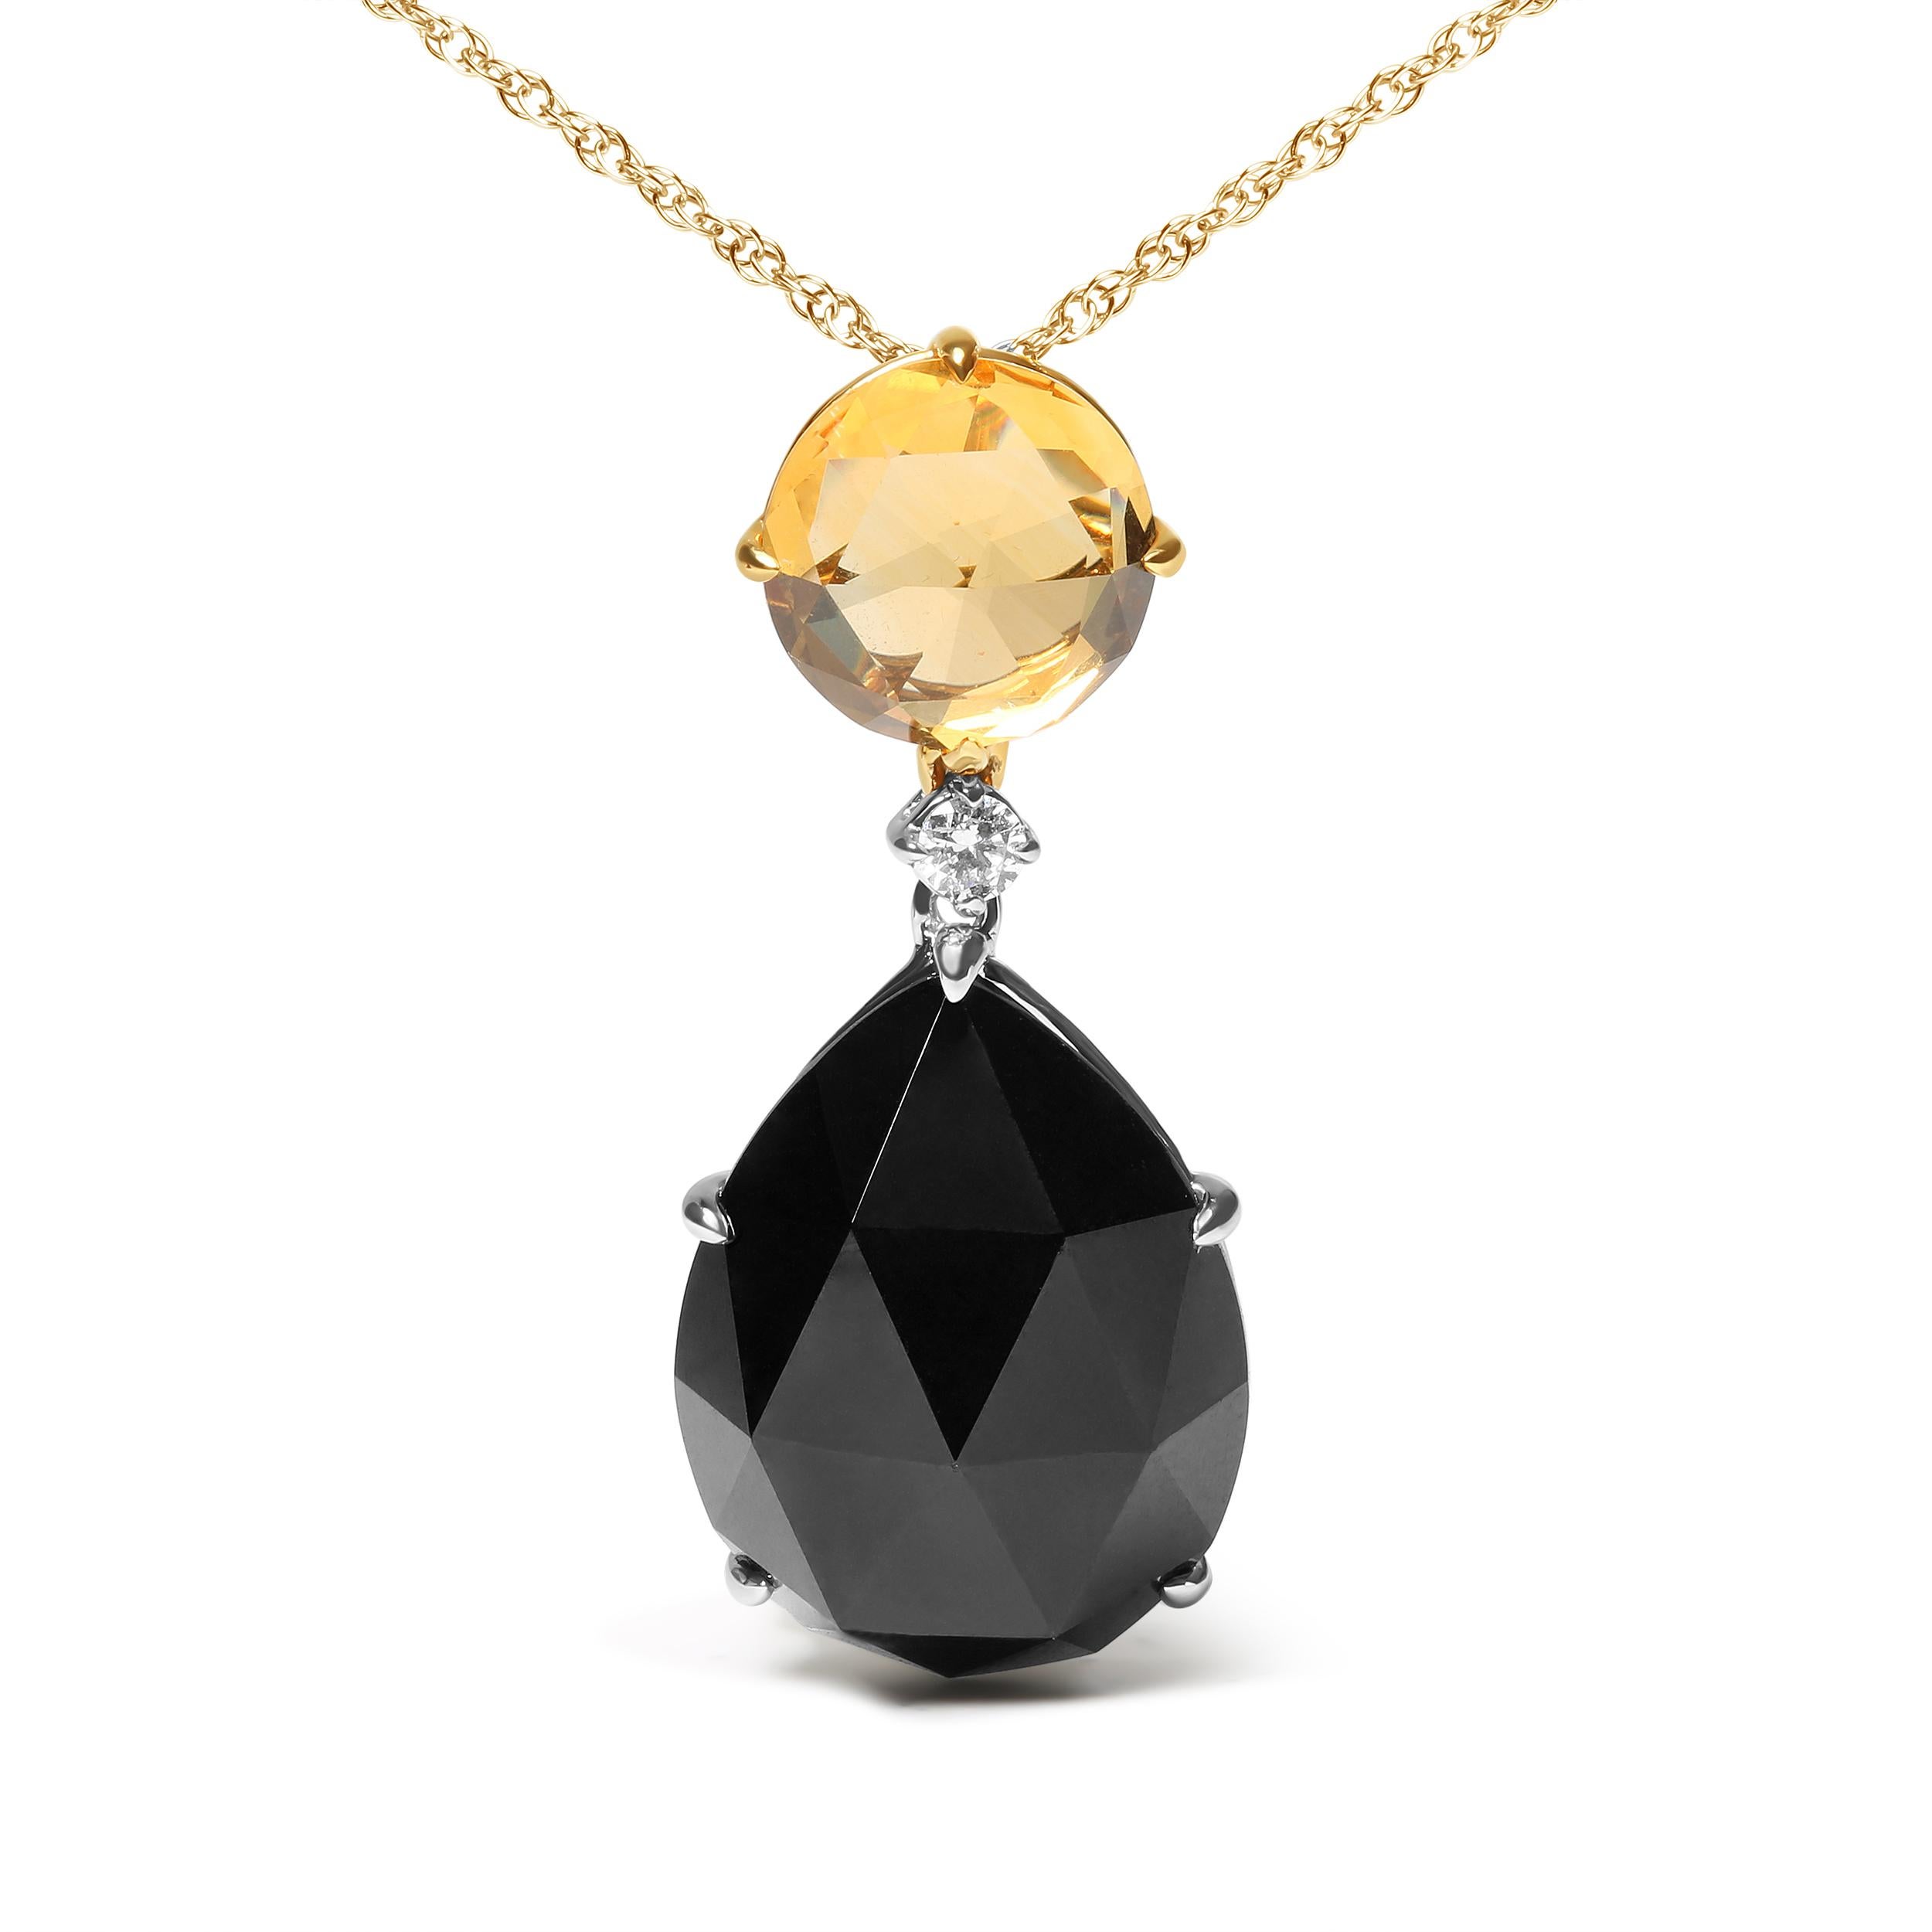 The mesmerizing beauty of this ravishing 18k white and yellow gold pendant necklace makes an elegant addition to any outfit choice. A master of good fortune, a 22x16mm pear cut black onyx rests at the base of this pendant in a 4-prong setting. The